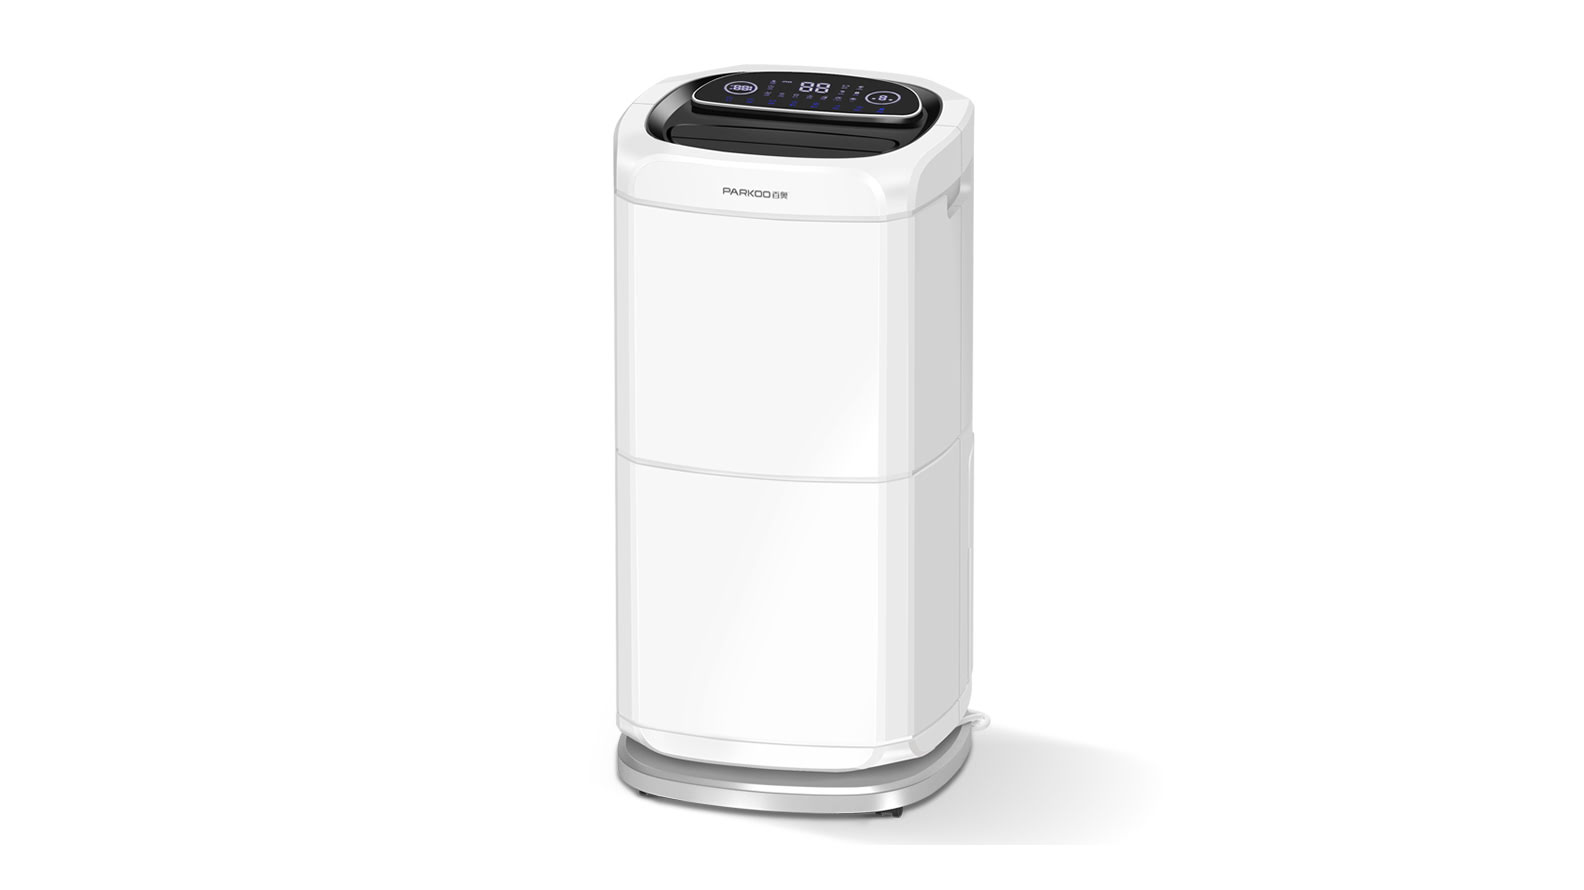 Is Dehumidifier suitable for drying clothes as a Clothes dryer-